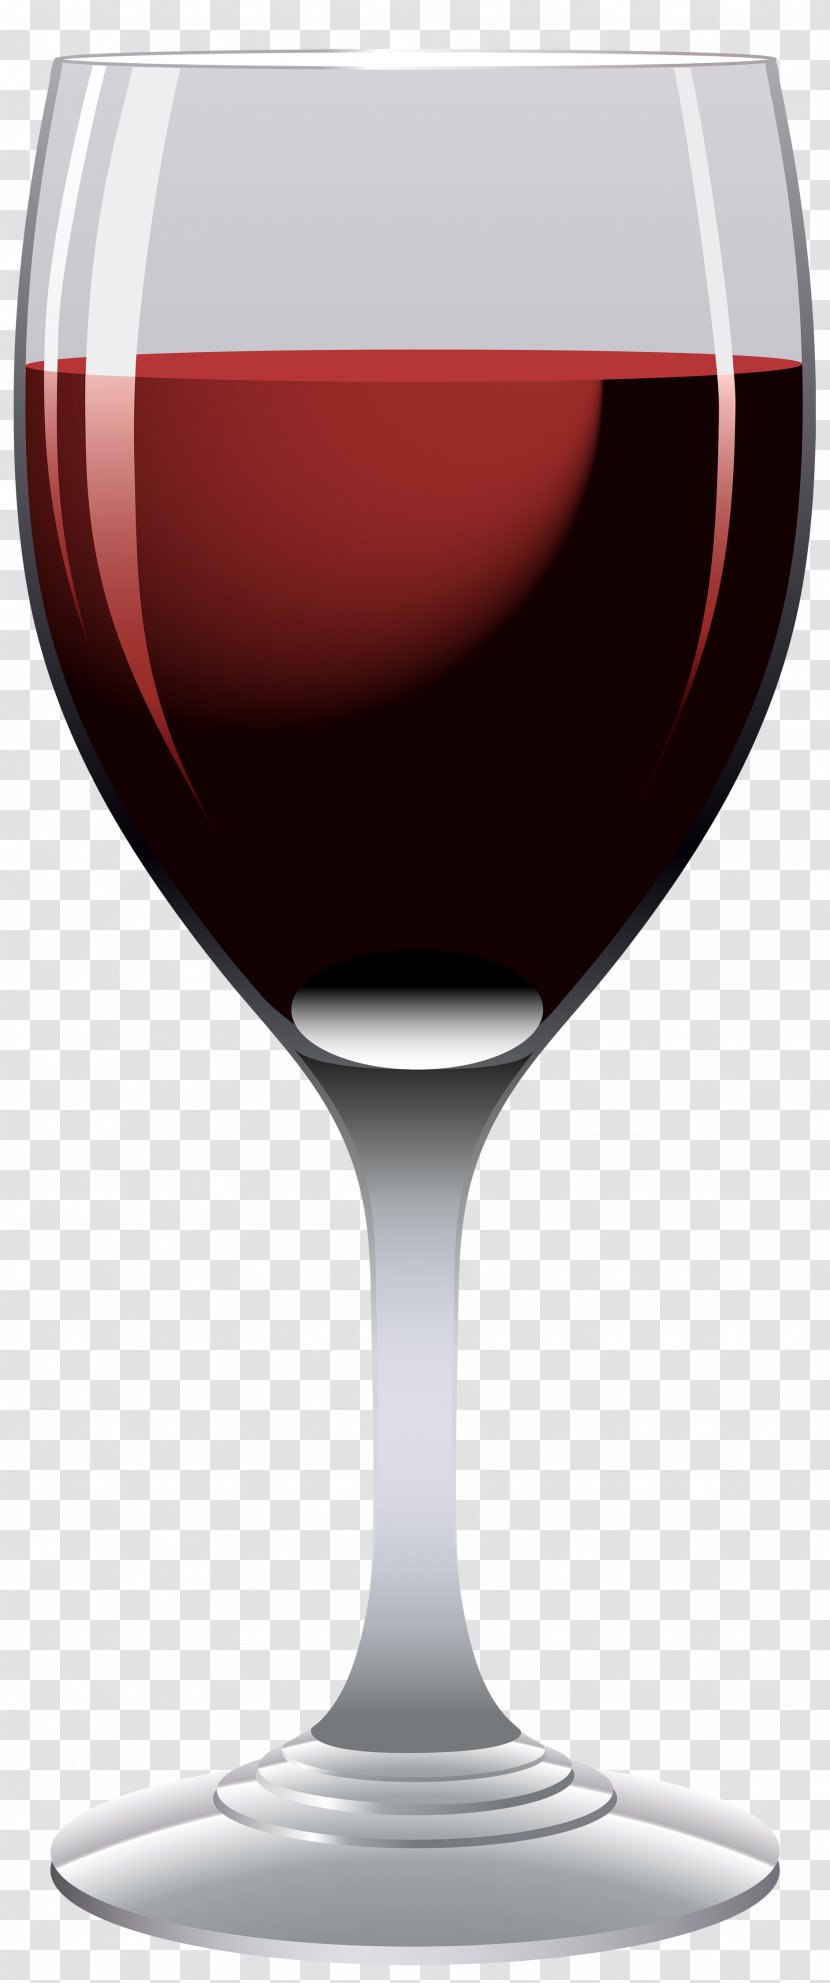 Red Wine Glass Clip Art - Champagne Stemware - Goblet Cliparts Transparent PNG